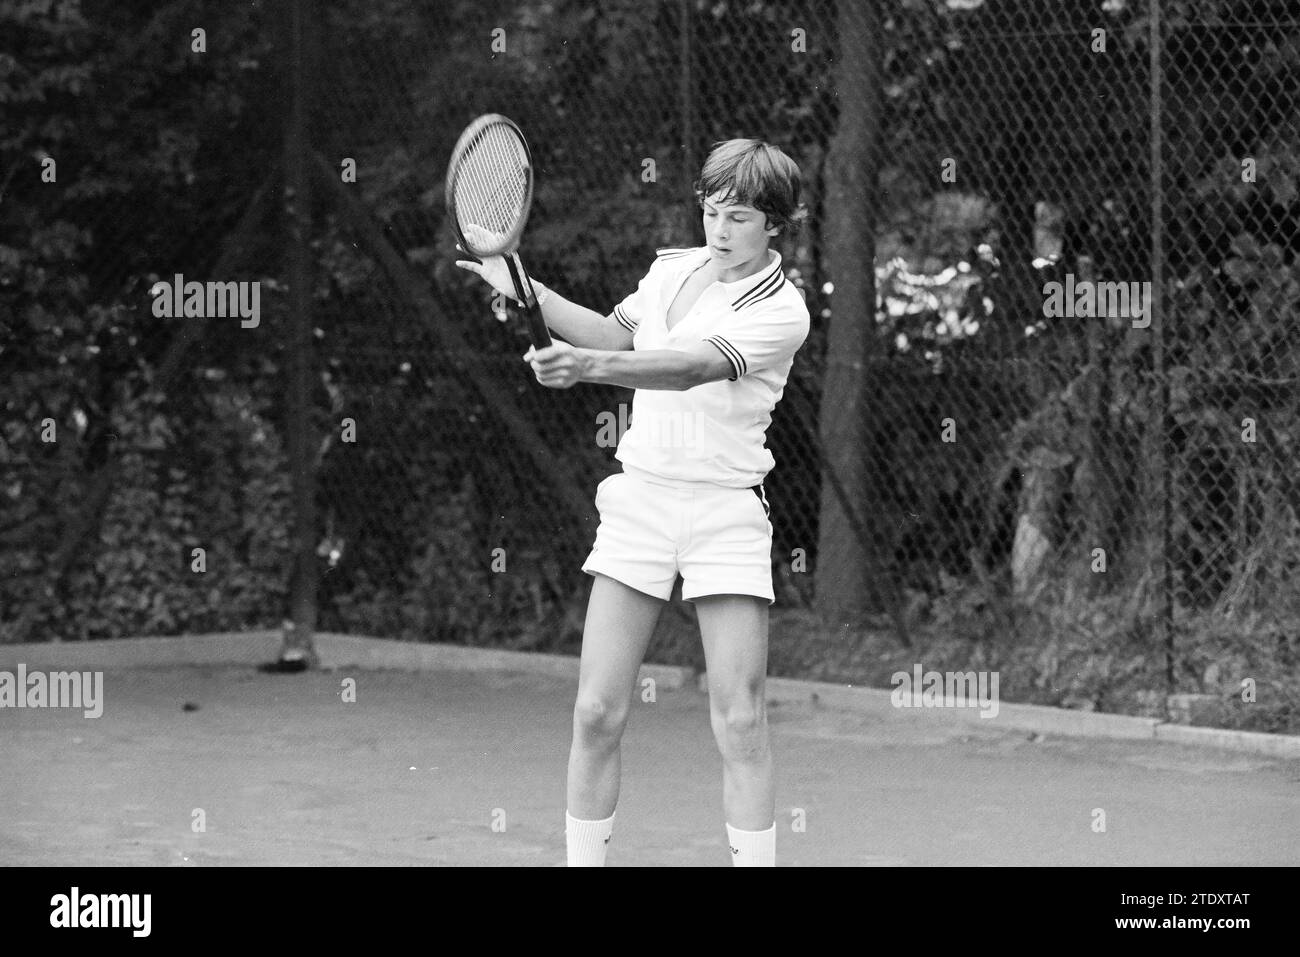 Tennis association TVB, Barendrecht, , Whizgle News from the Past, Tailored for the Future. Explore historical narratives, Dutch The Netherlands agency image with a modern perspective, bridging the gap between yesterday's events and tomorrow's insights. A timeless journey shaping the stories that shape our future. Stock Photo